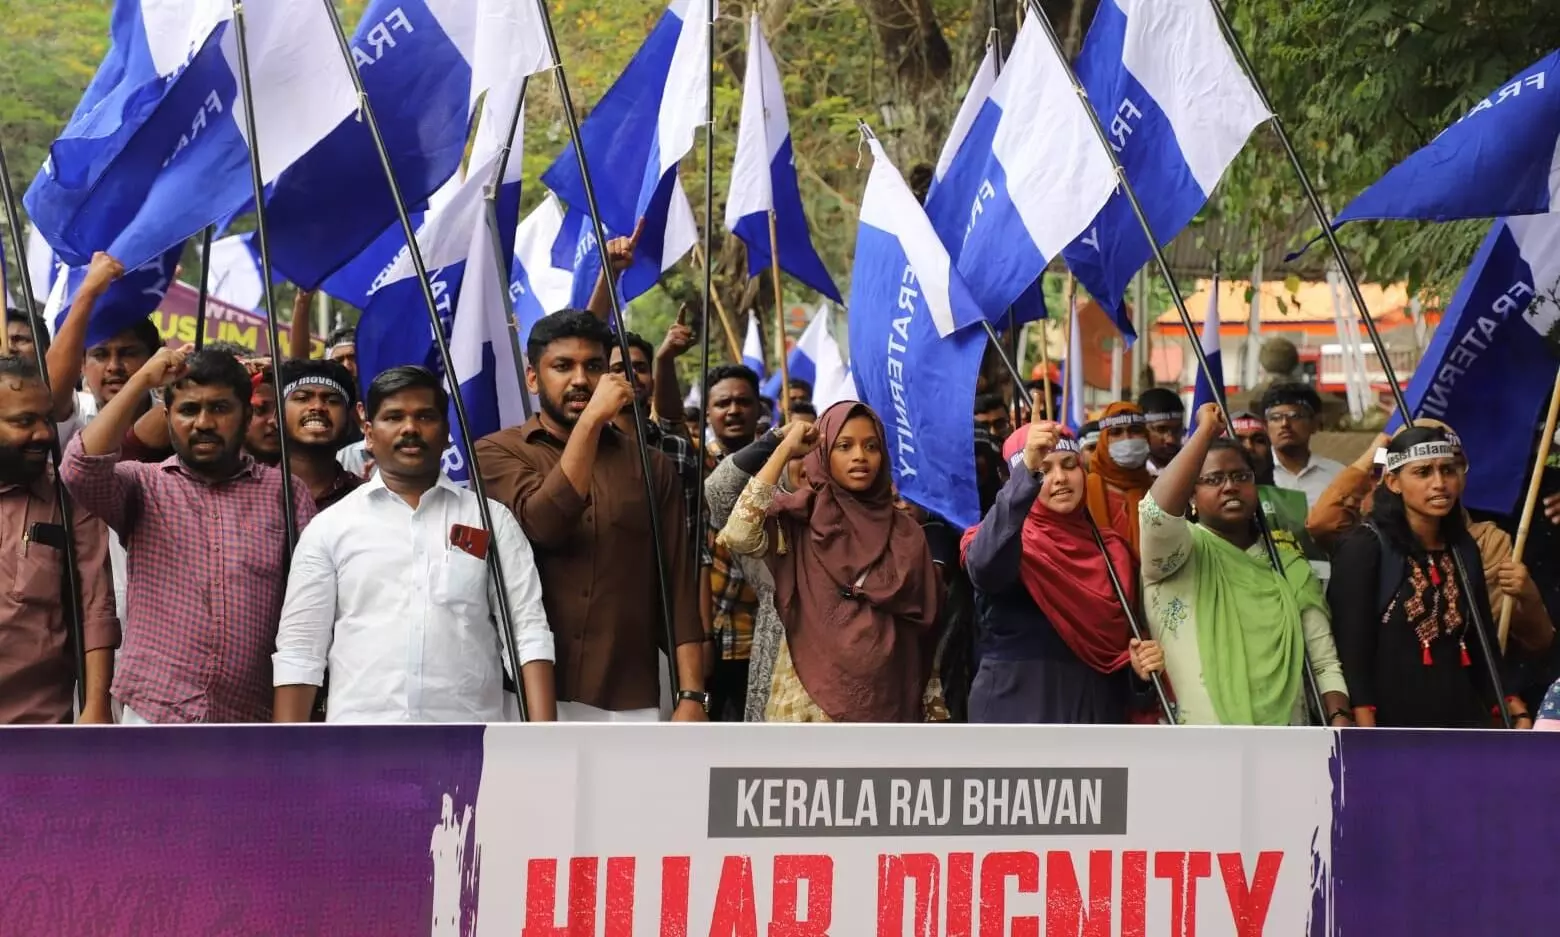 Resist the racial agenda of the Sangh Parivar; Hijab Dignity March led by Fraternity Movement